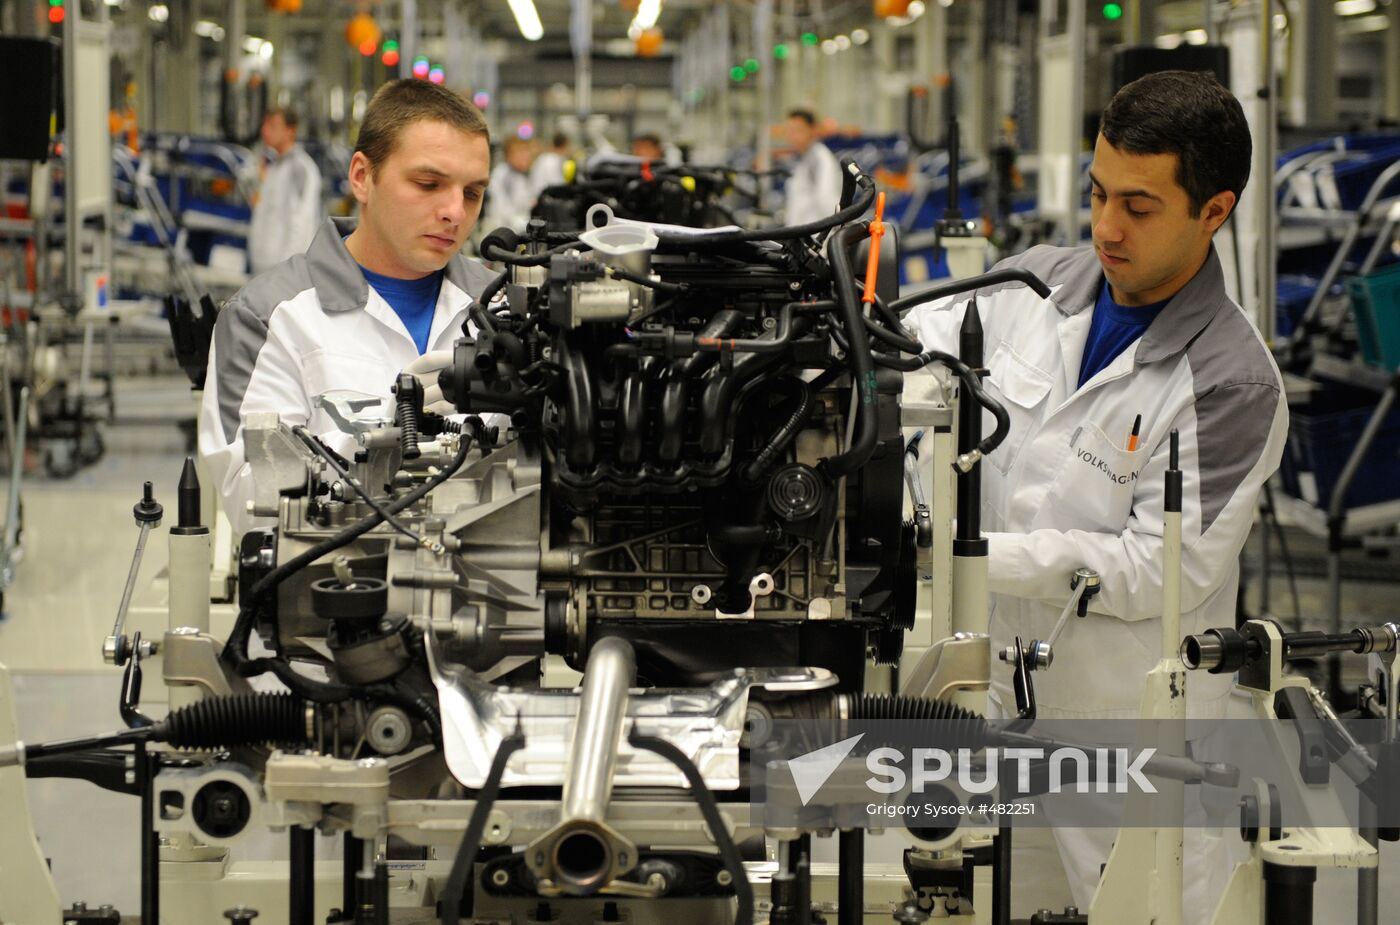 Volkswagen Rus Group launching full-cycle production of cars